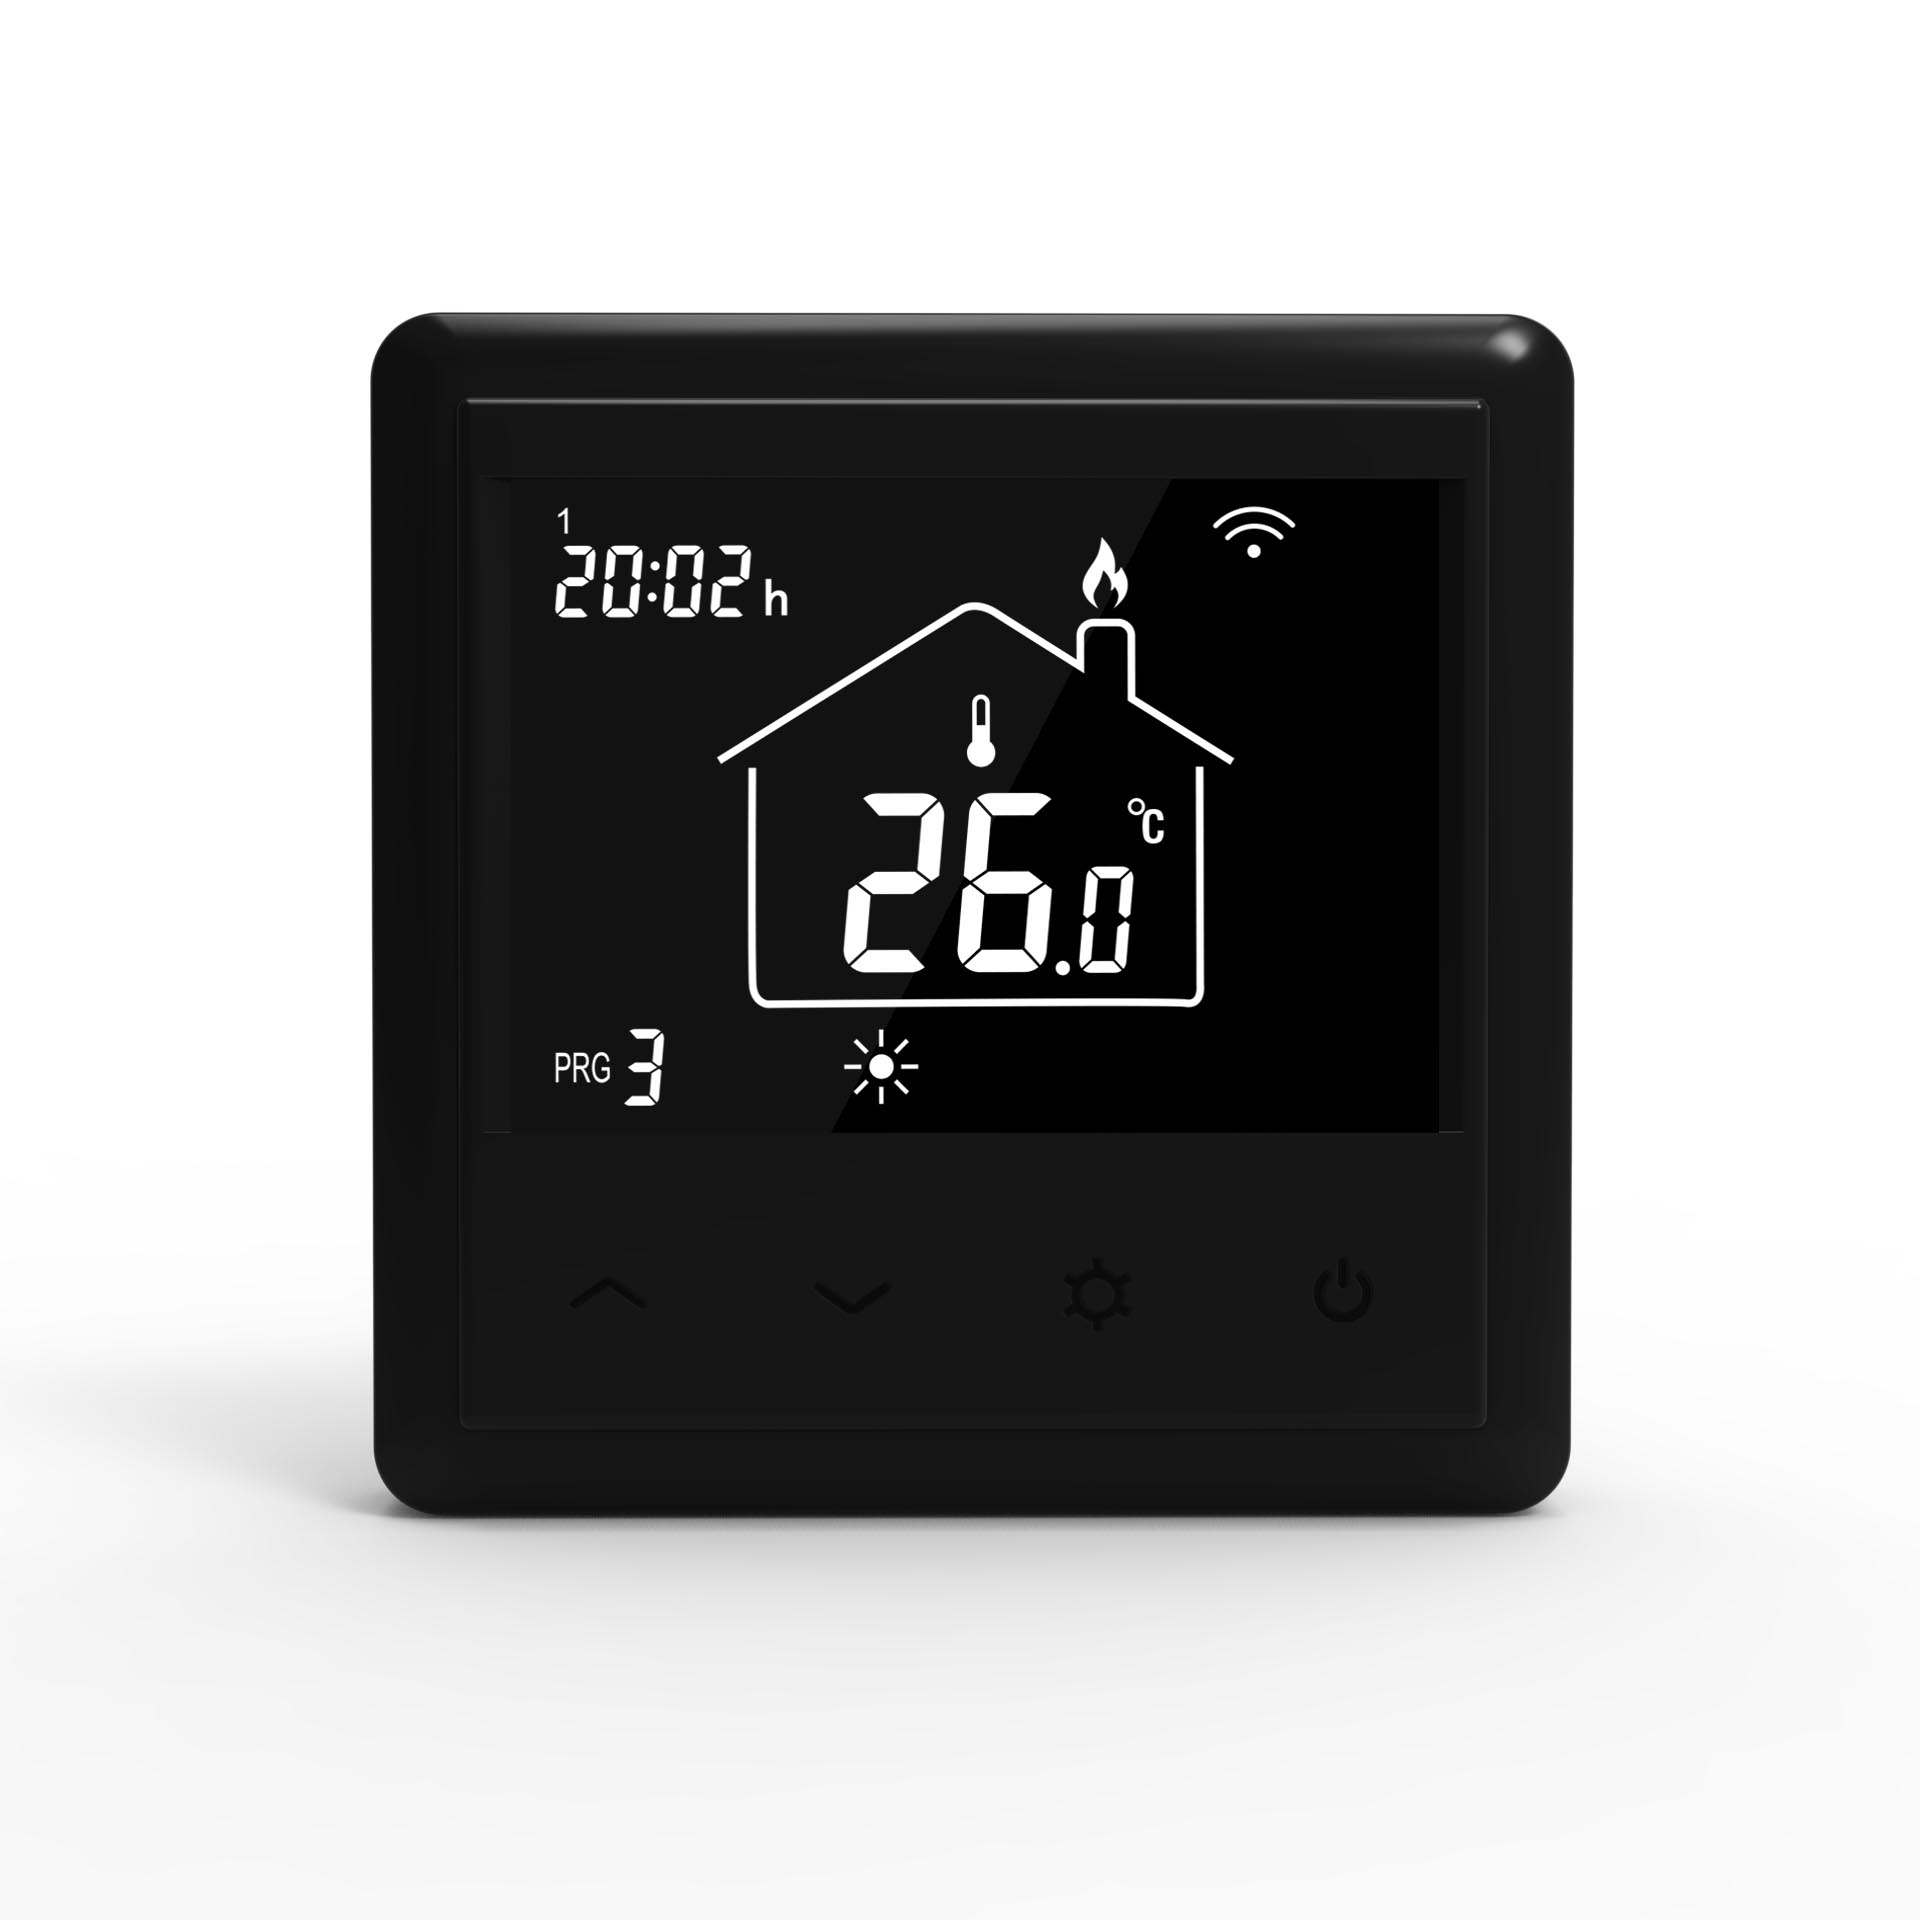 Black Display Thermostat For In House Electric Floor Heating System